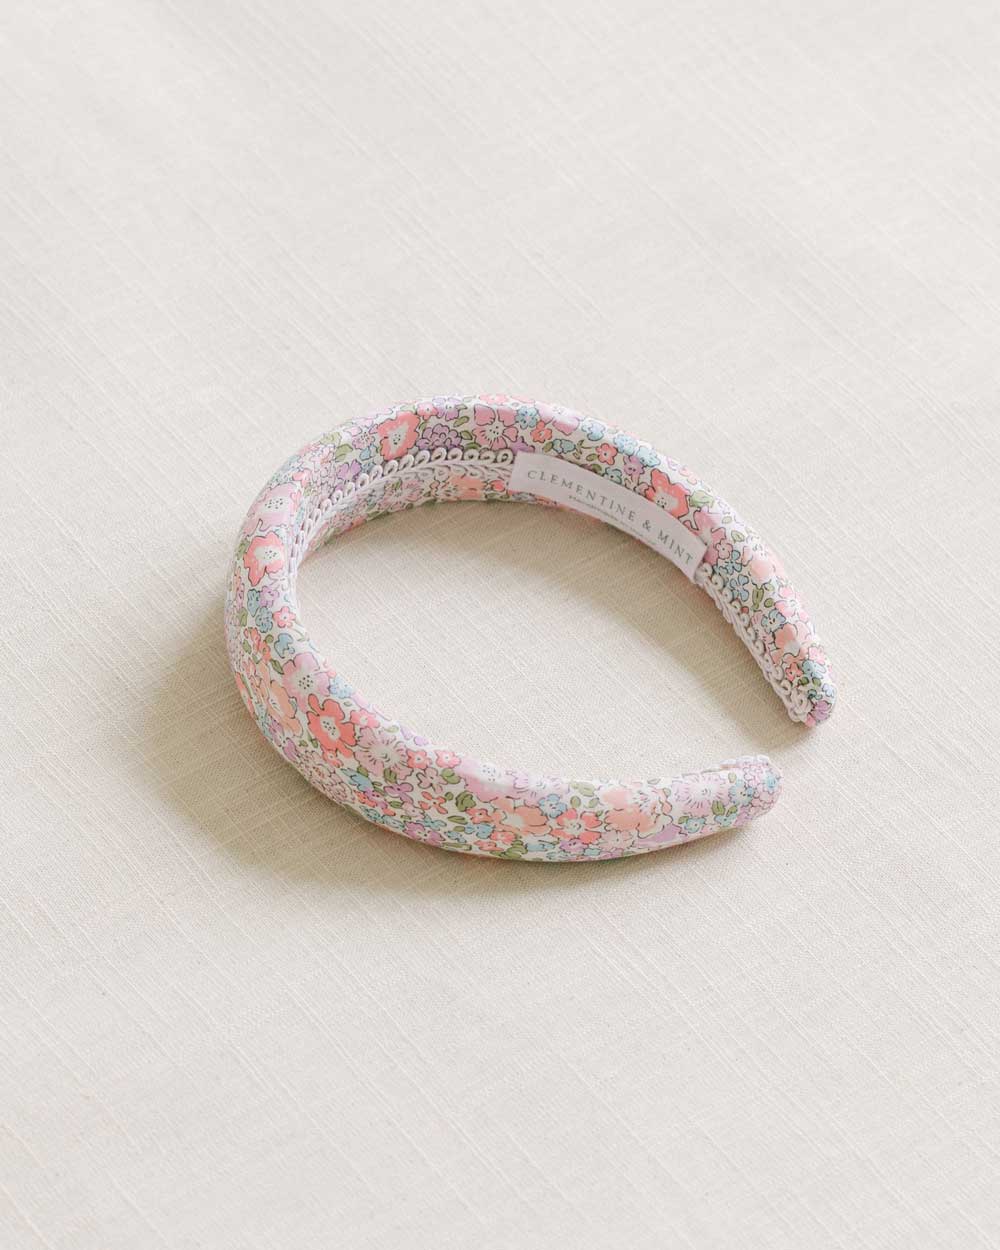 THE PASTEL FLORAL HEADBAND MADE WITH LIBERTY FABRIC